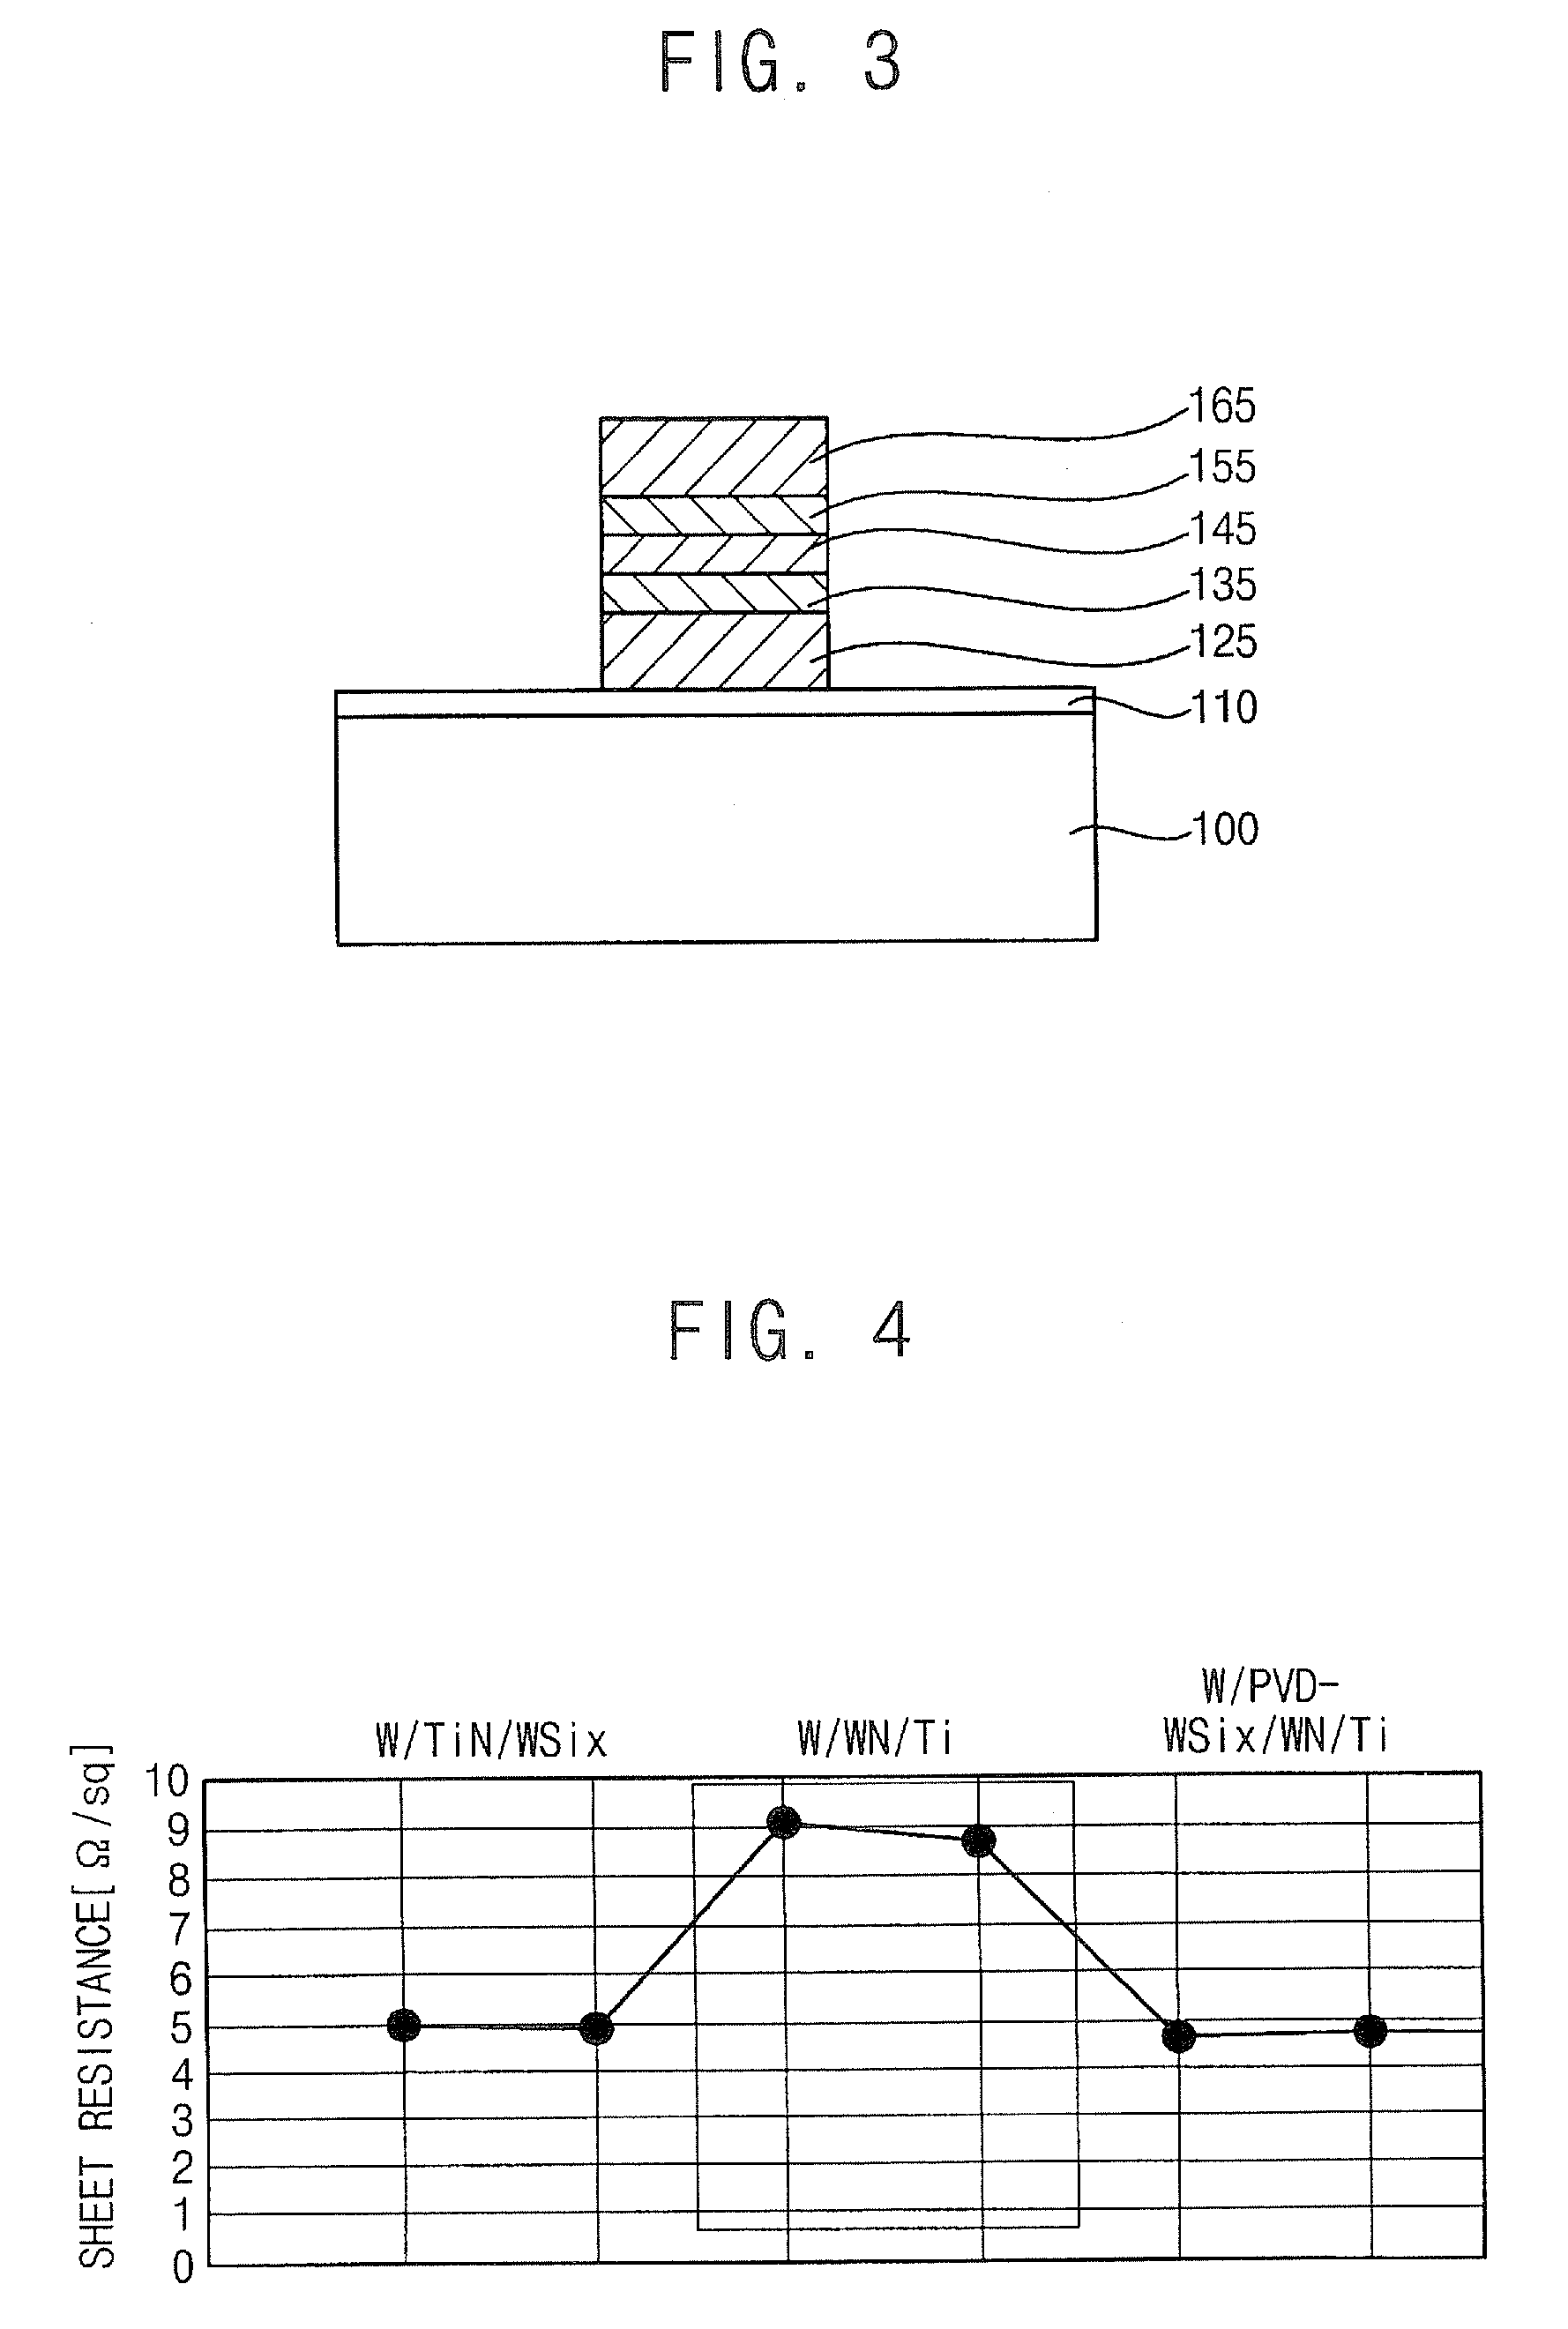 Gate structures in semiconductor devices